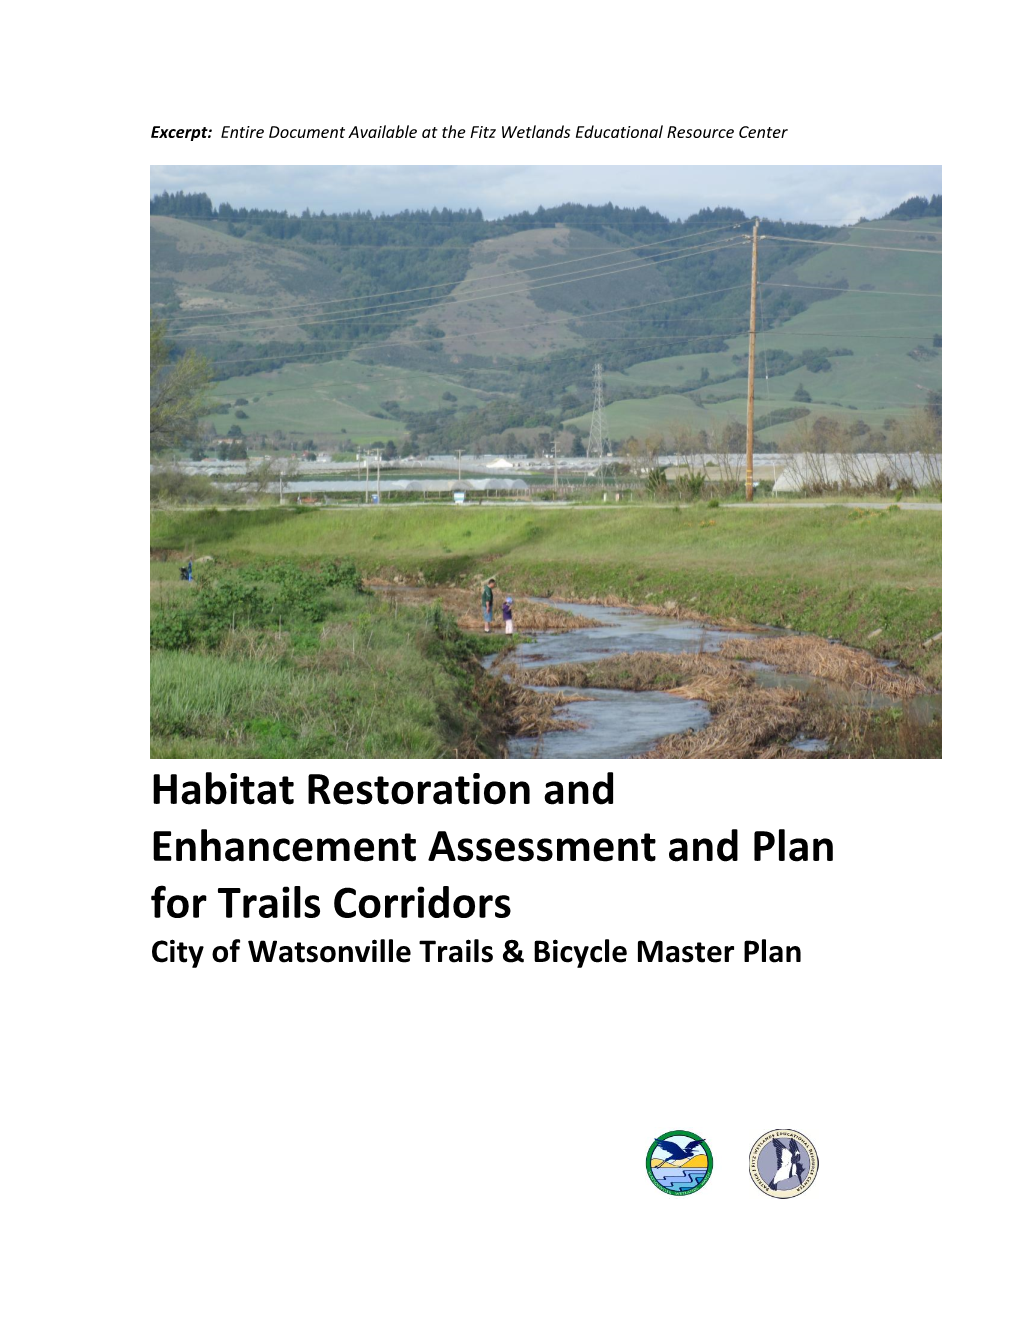 Habitat Restoration and Enhancement Assessment and Plan for Trails Corridors City of Watsonville Trails & Bicycle Master Plan